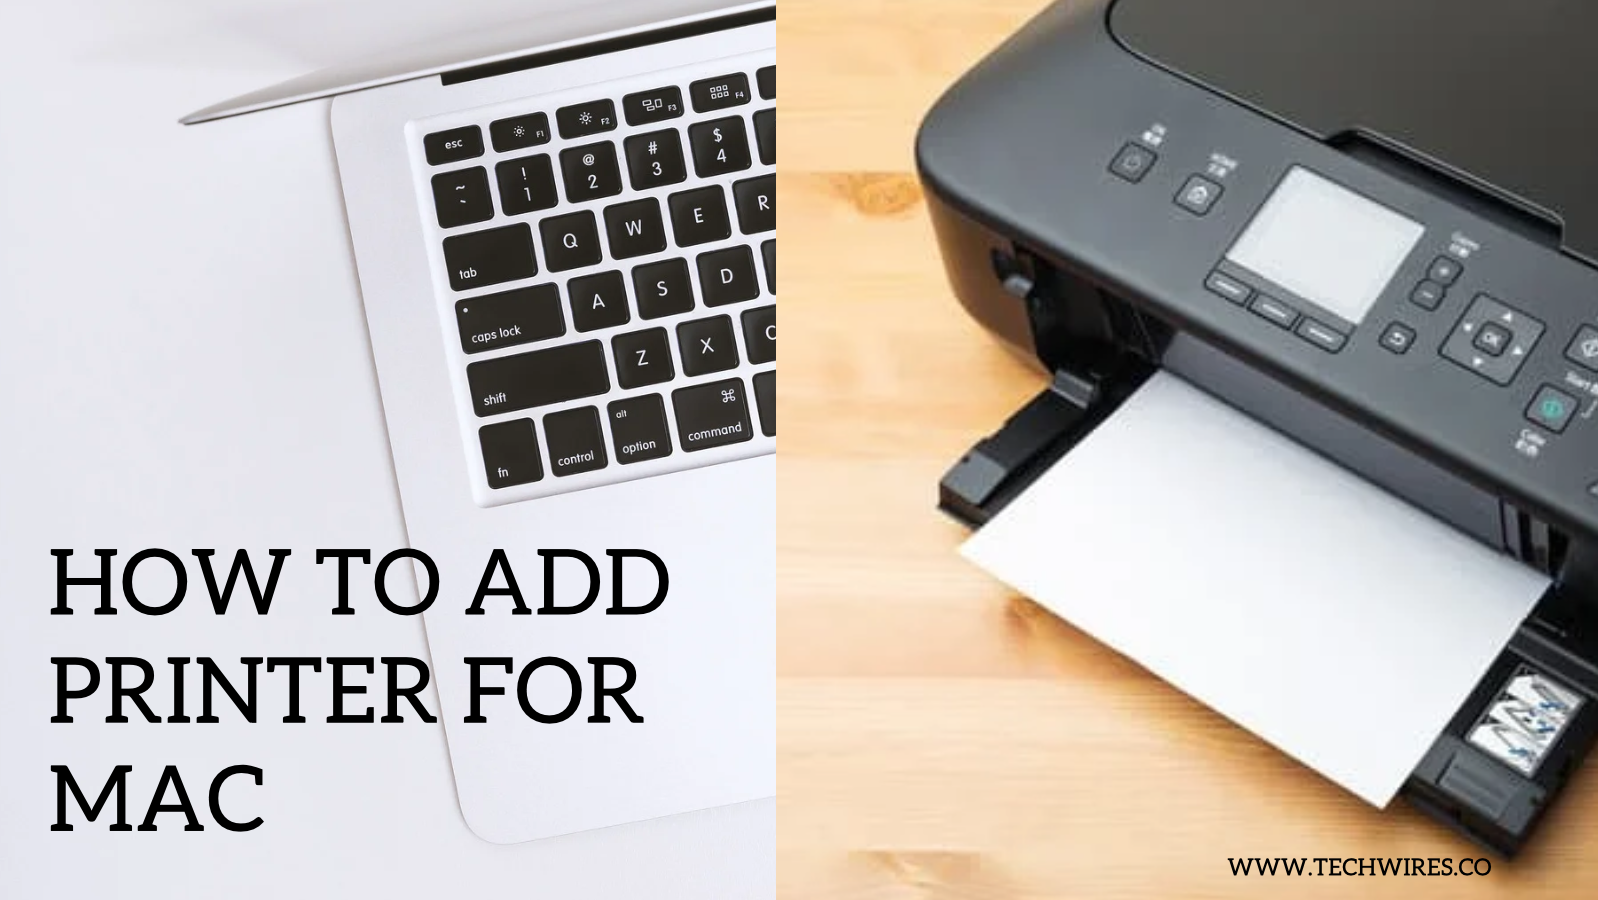 How to Add Printer for Mac